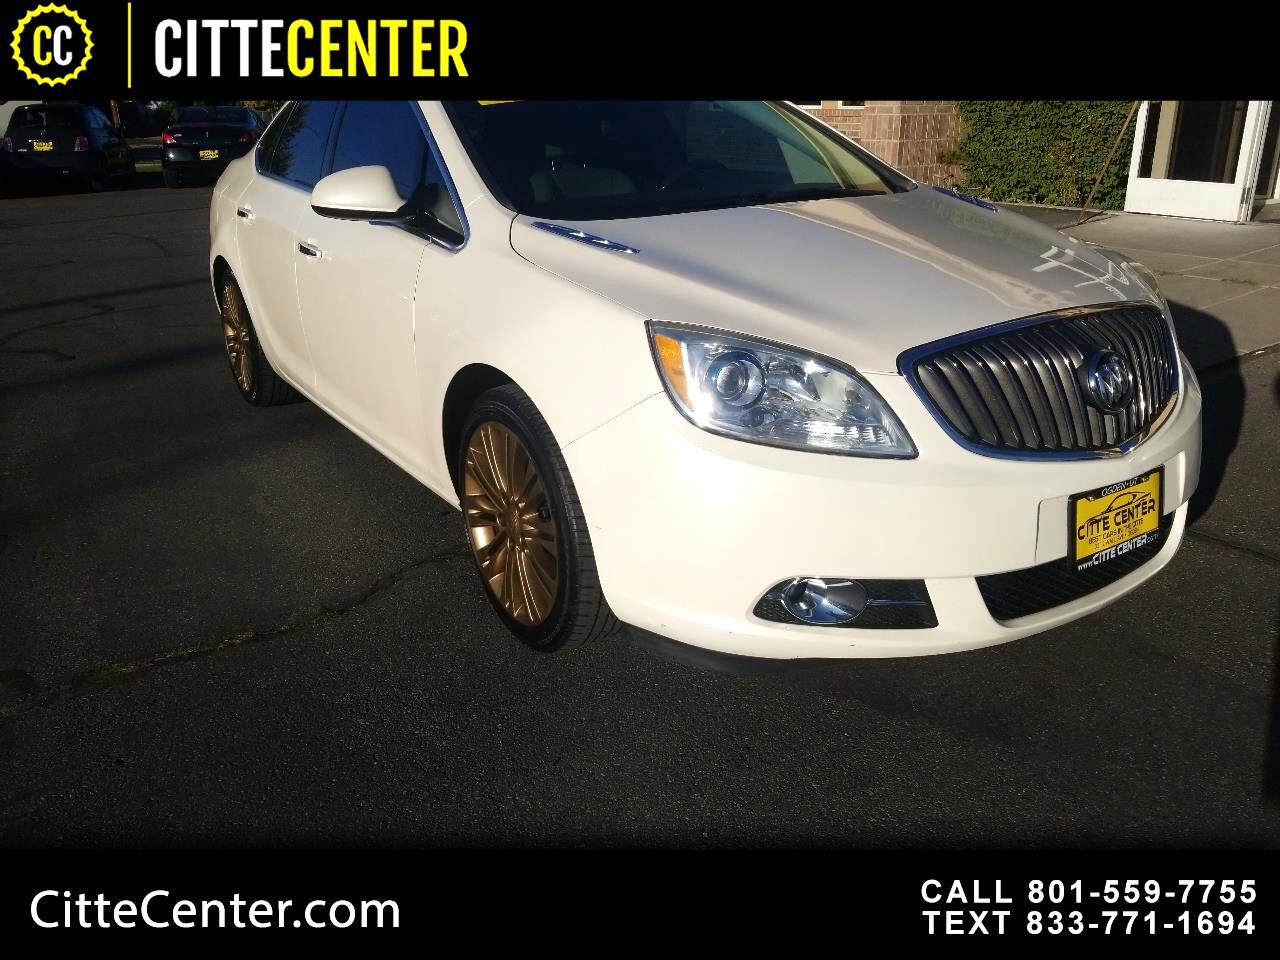 Buick Verano 4dr Sdn Leather Group 2012